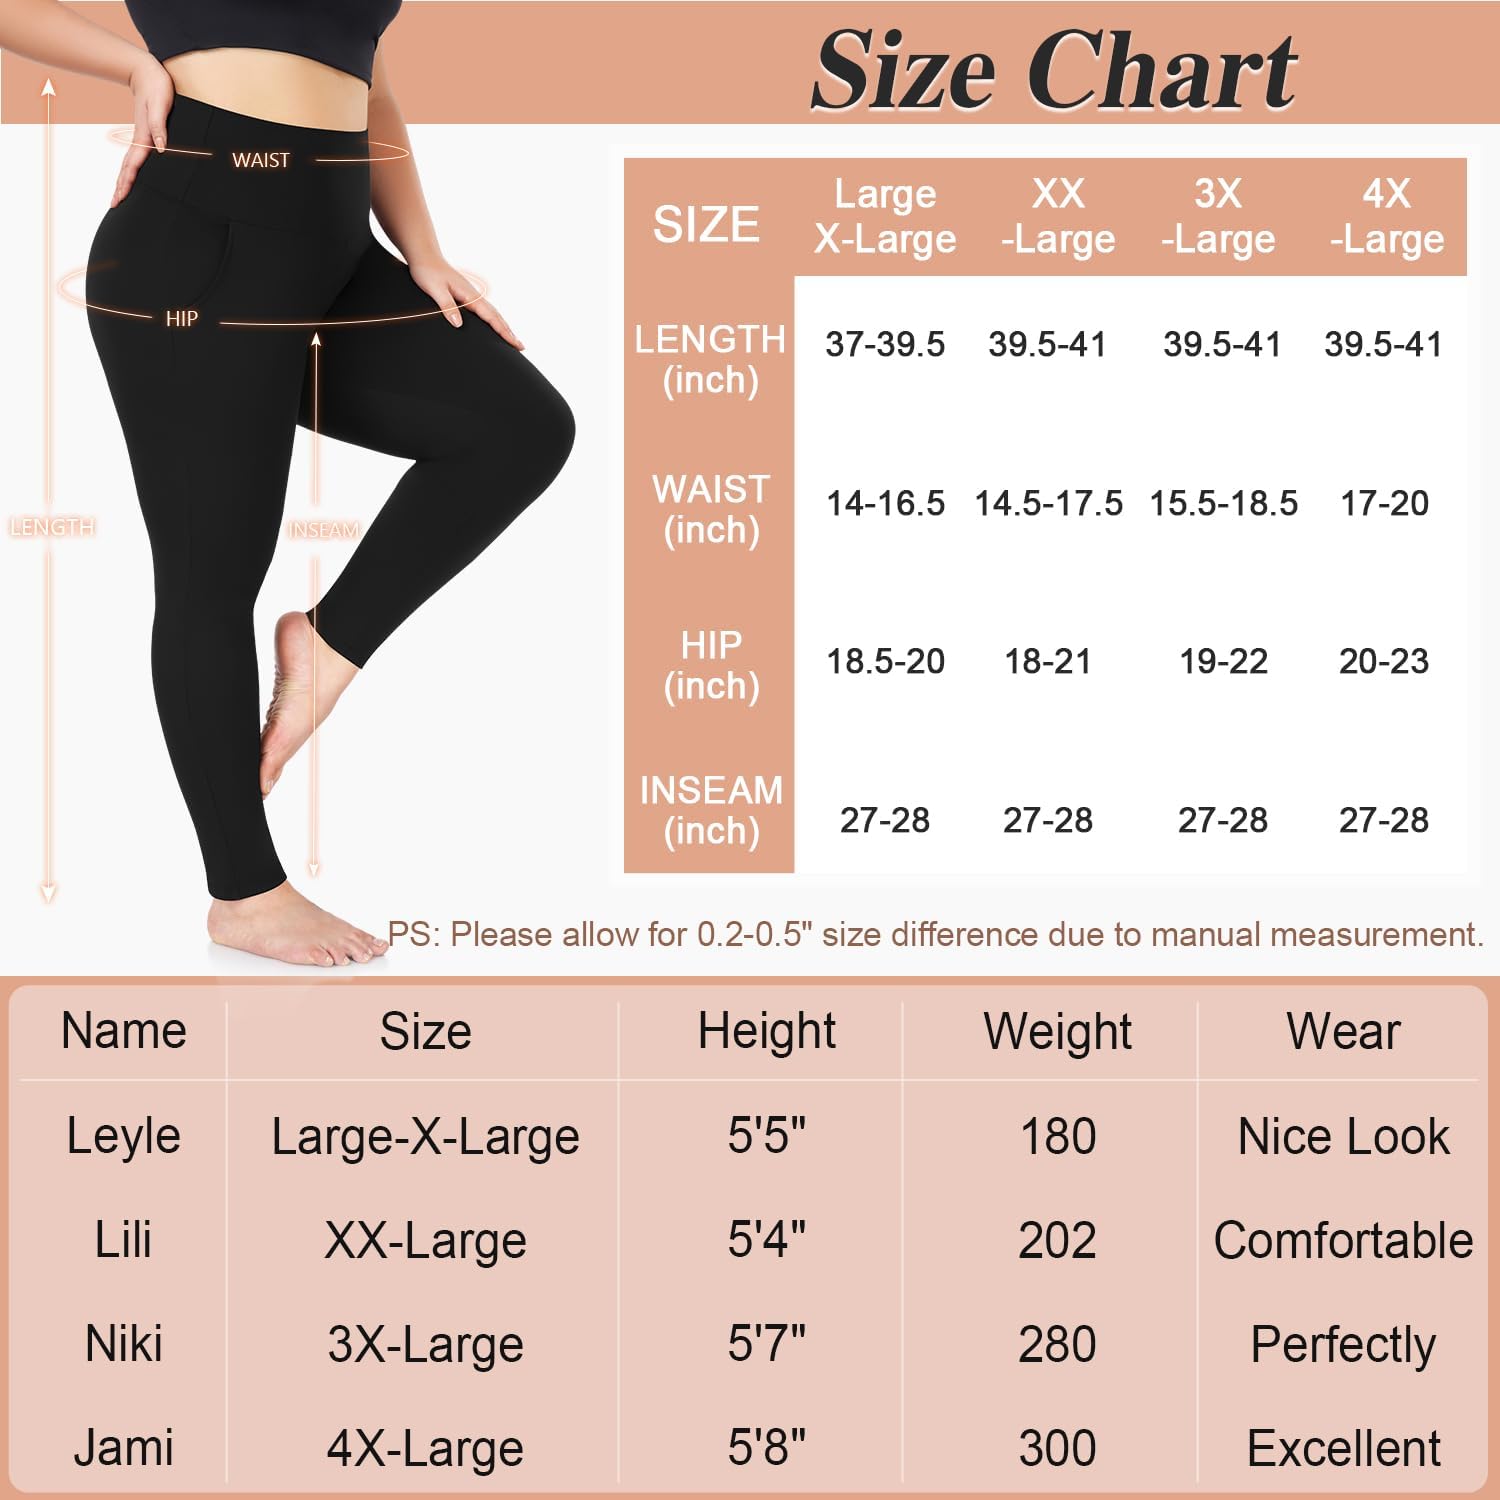 Plus Size Leggings Fleece Lined with Pockets for Womem 1X-4X -High Waist Tummy Control Soft Thermal Warm Workout Yoga Pants